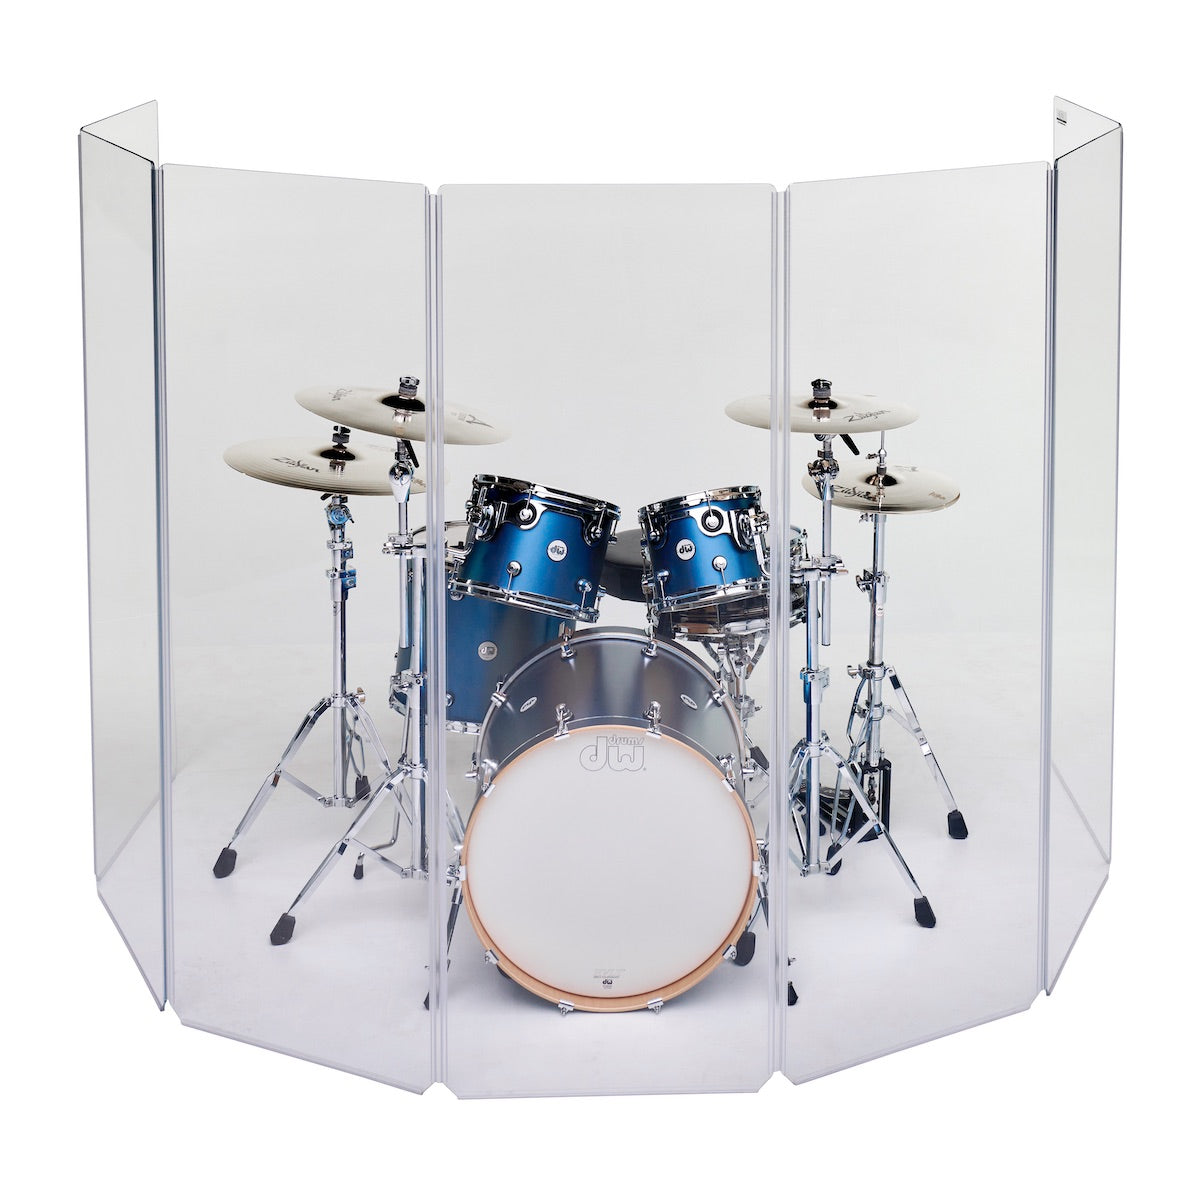 ClearSonic A2466x7 Drum Shield - 7 panel Sound Isolation System, front